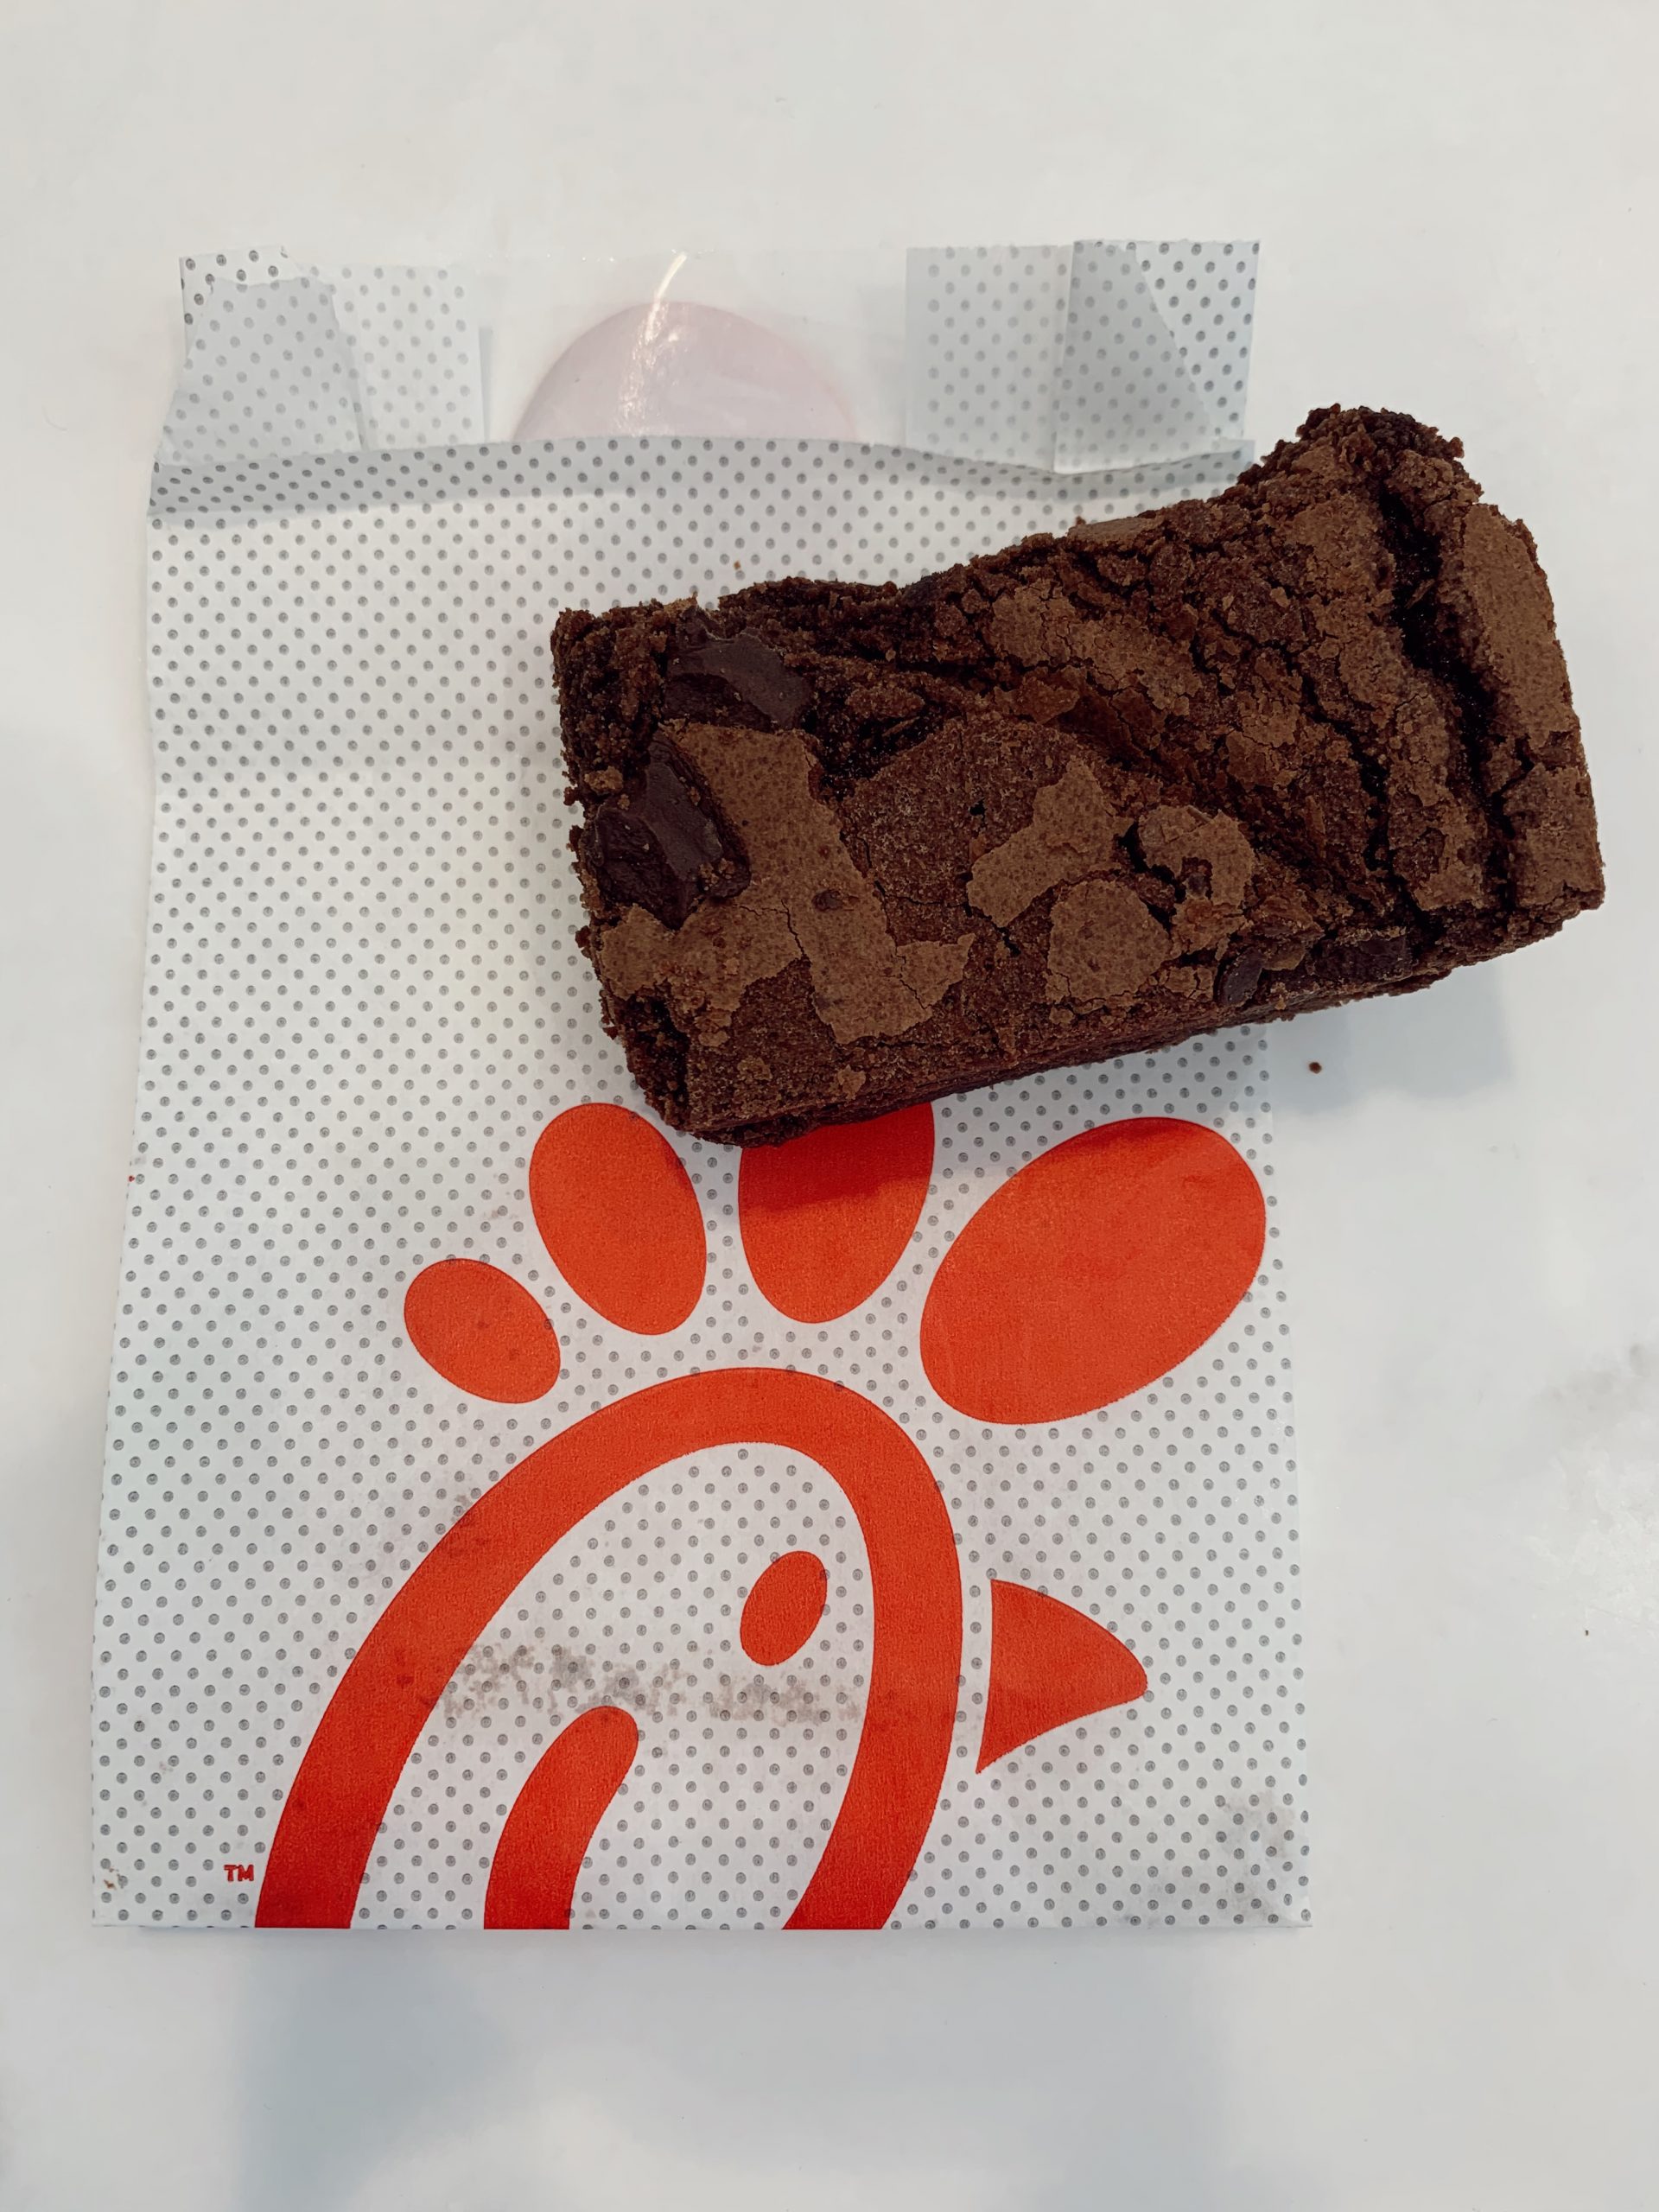 A fresh-baked, fudgy, chocolate brownie sits on top a Chick-fil-A treat bag with the red logo.